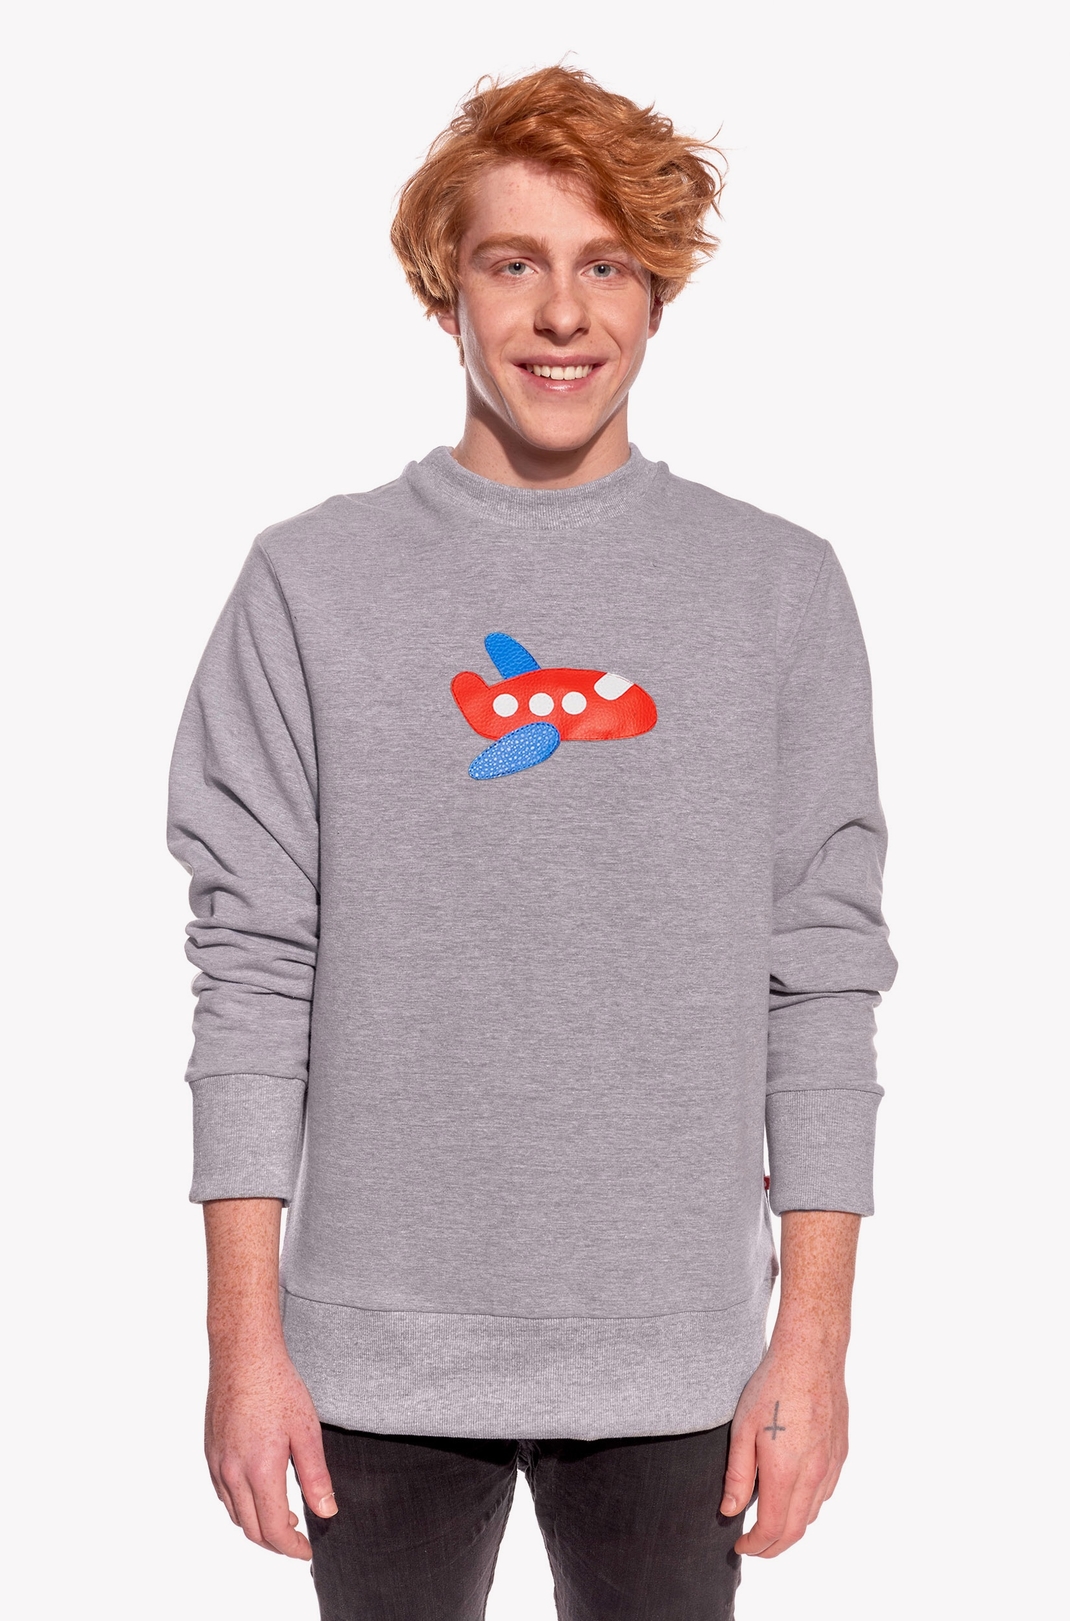 Hoodie with an airplane